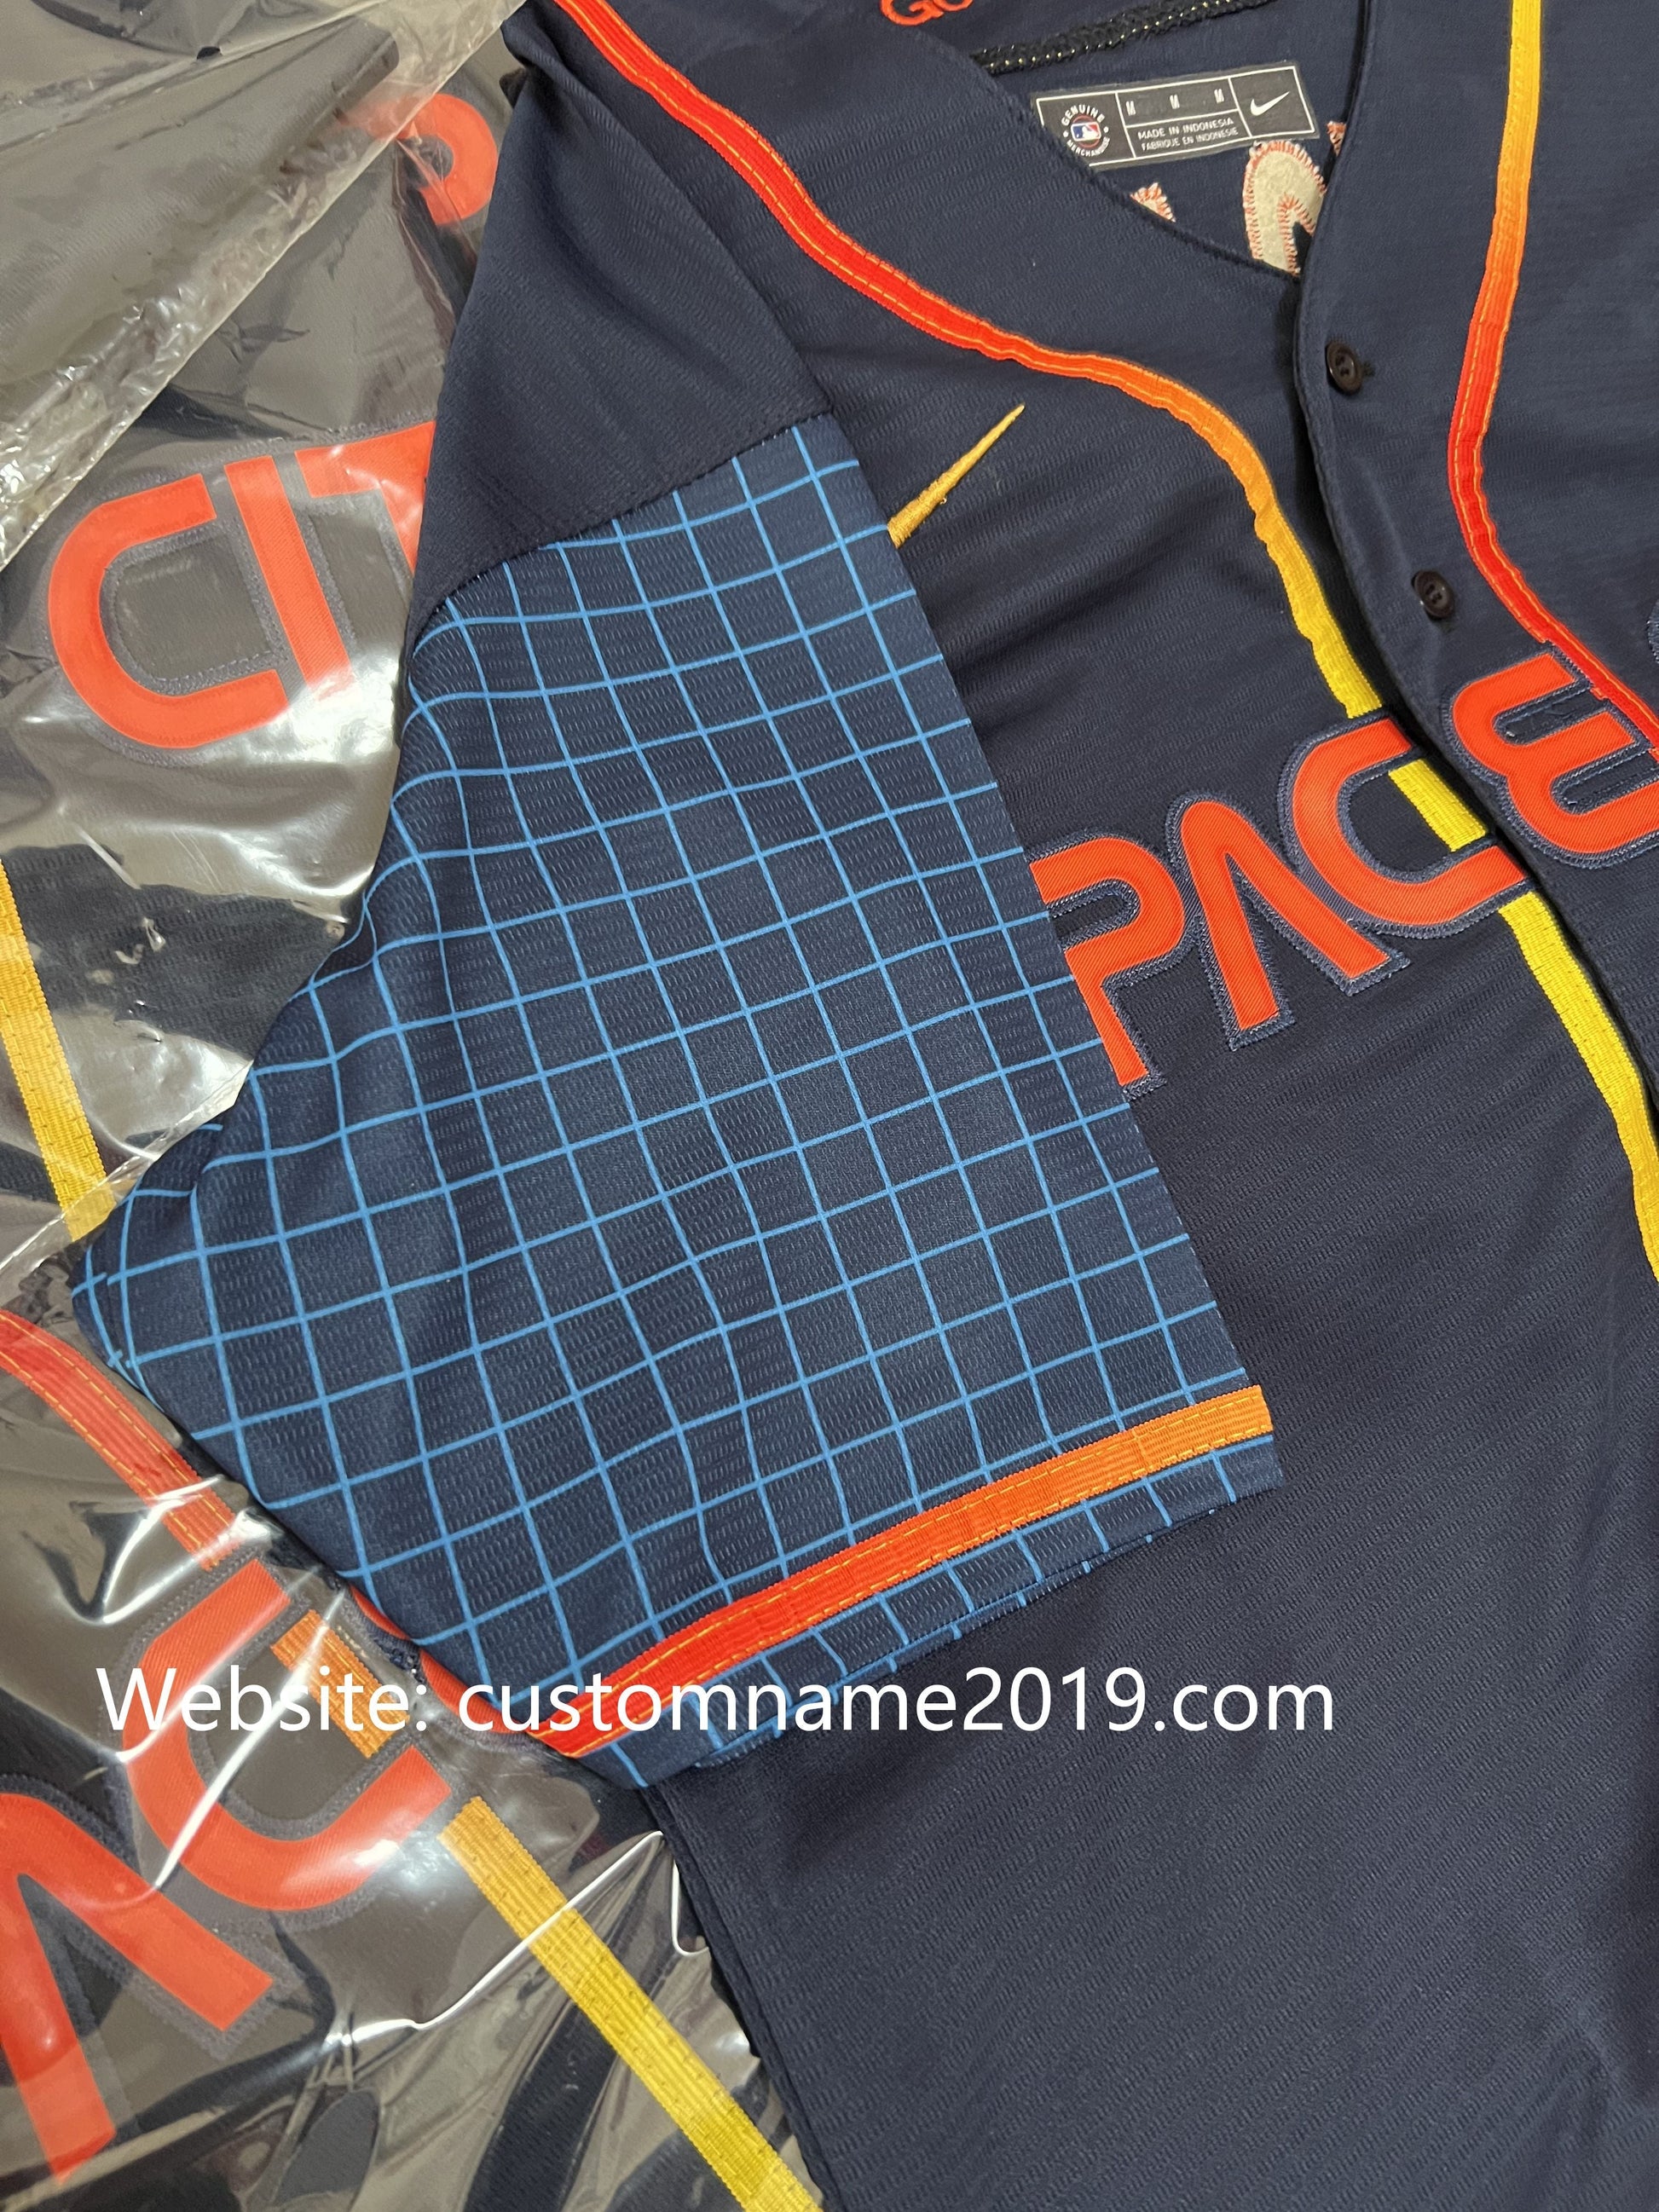 houston astros outfits for women space city jersey｜TikTok Search